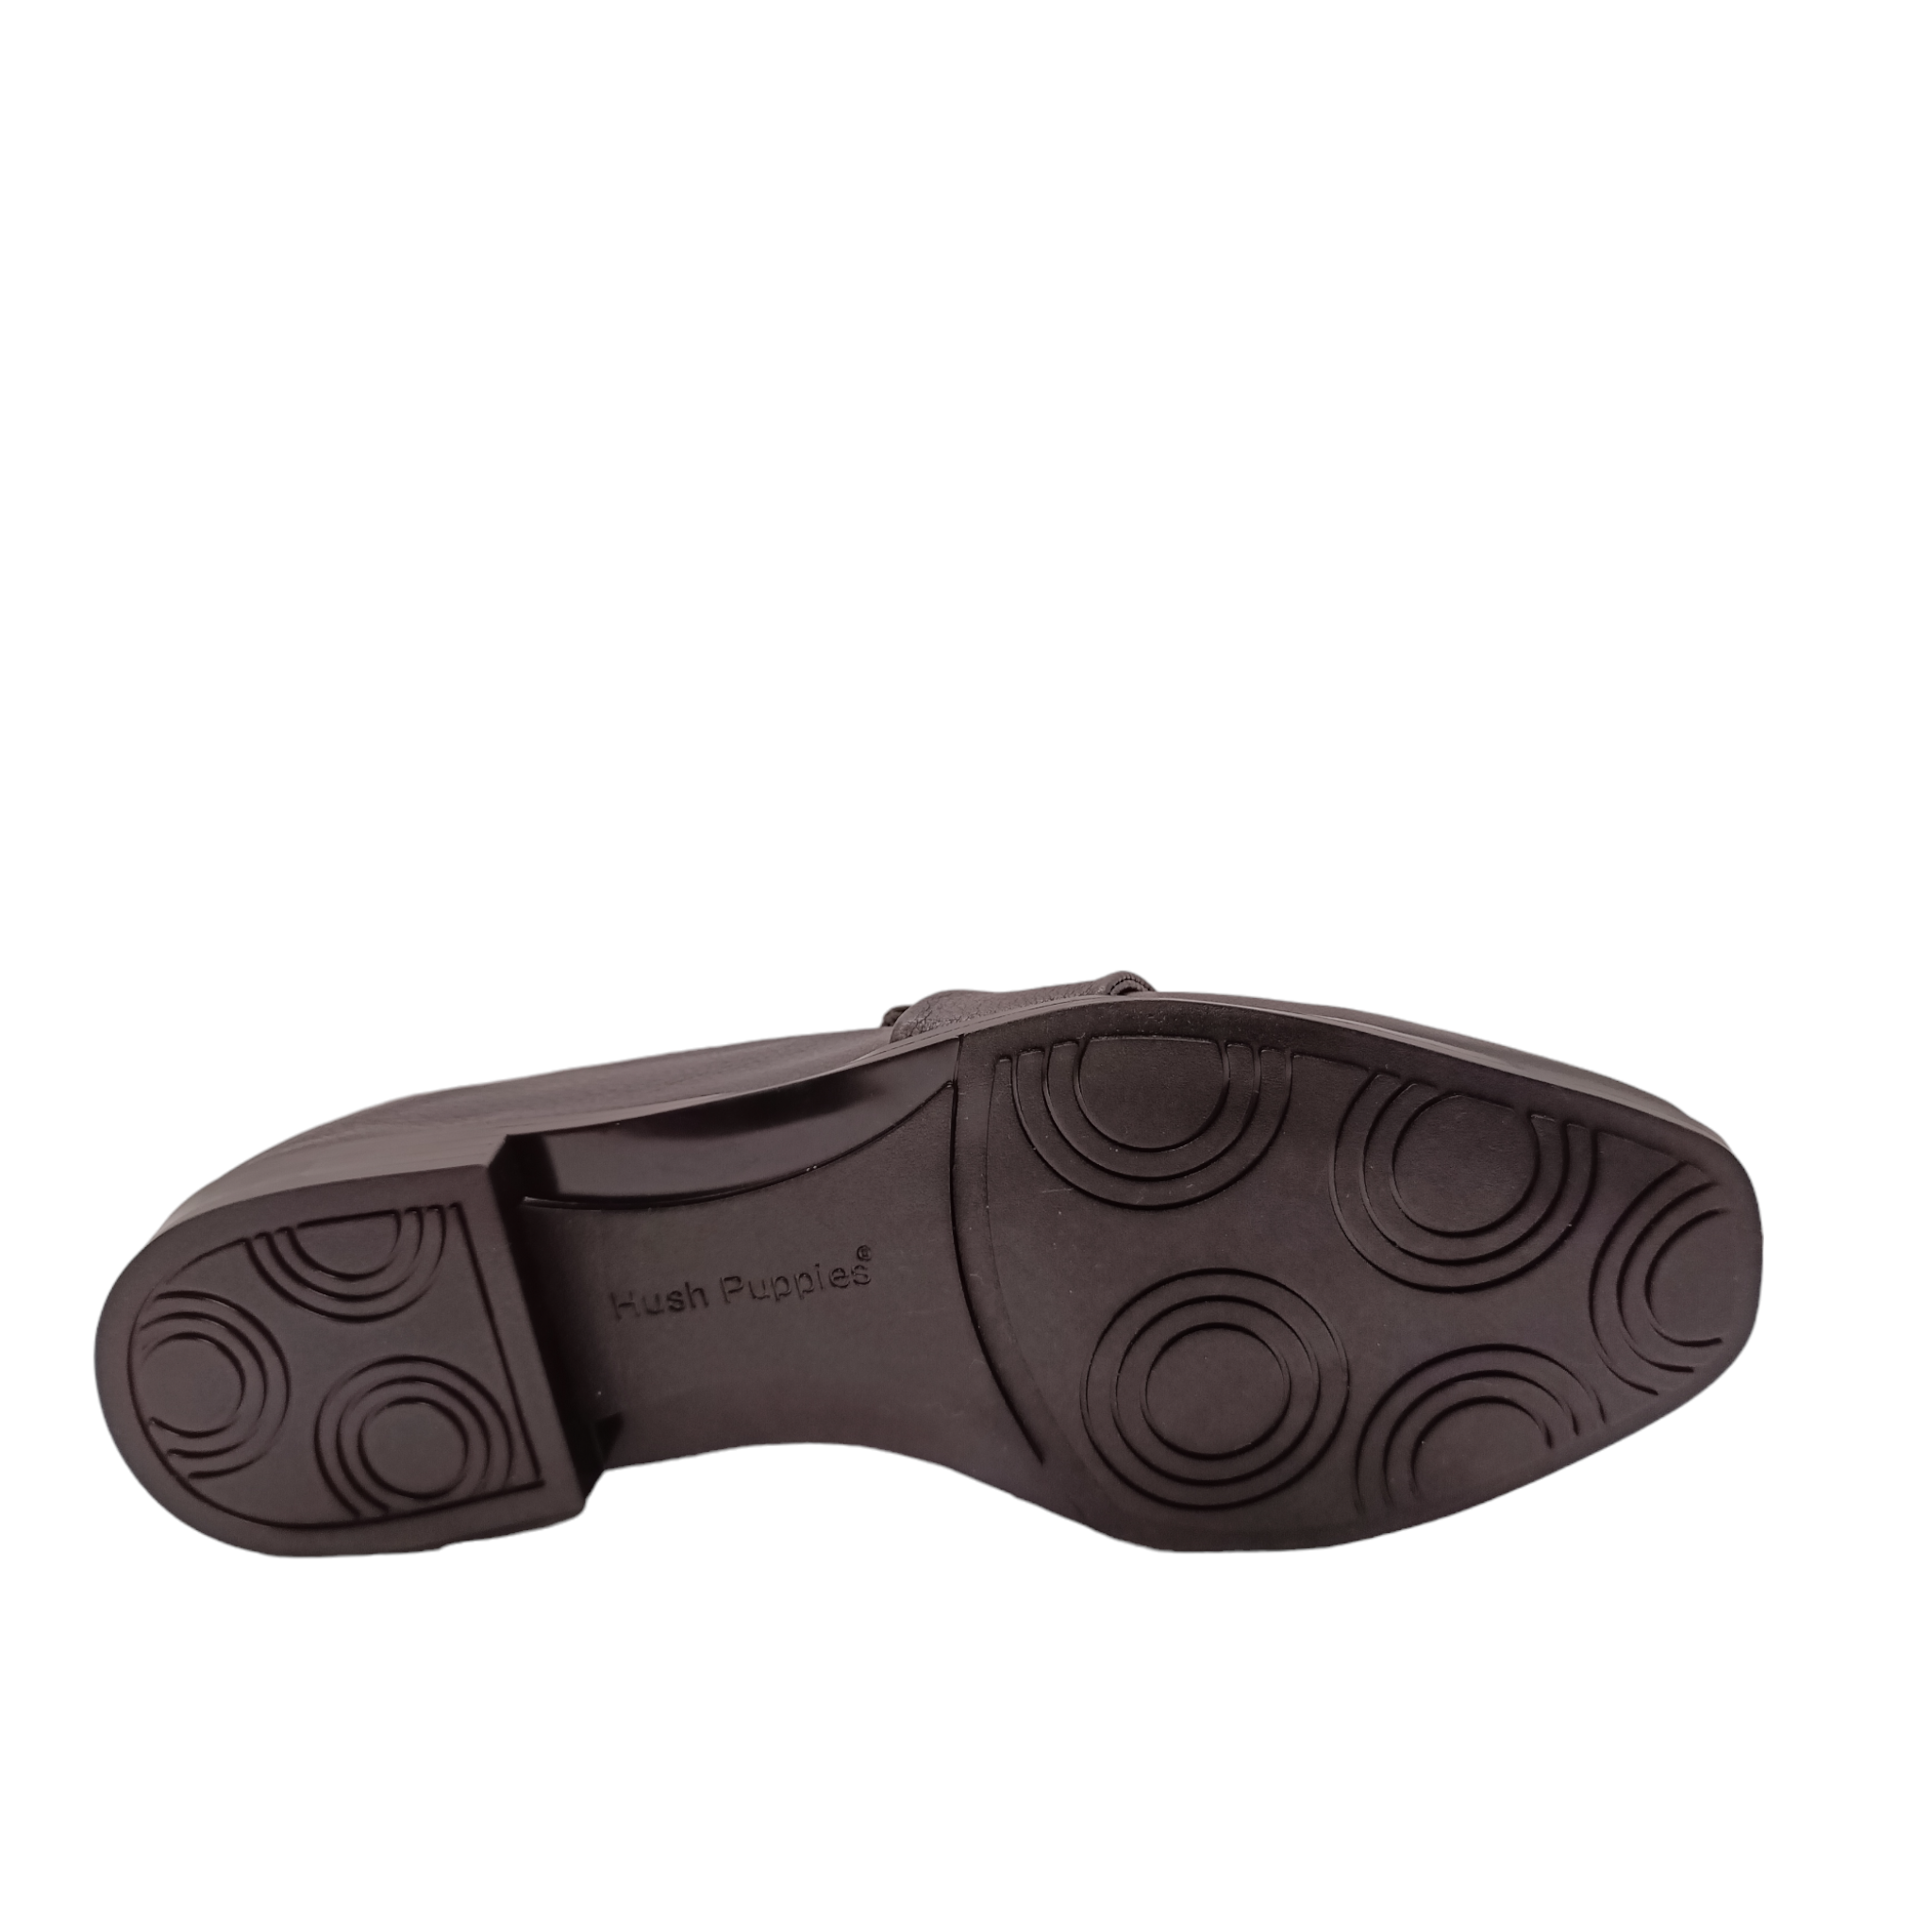 Shop Zen - with shoe&me - from Hush Puppies - Loafers - Loafer, Shoe, Summer, Winter, Womens